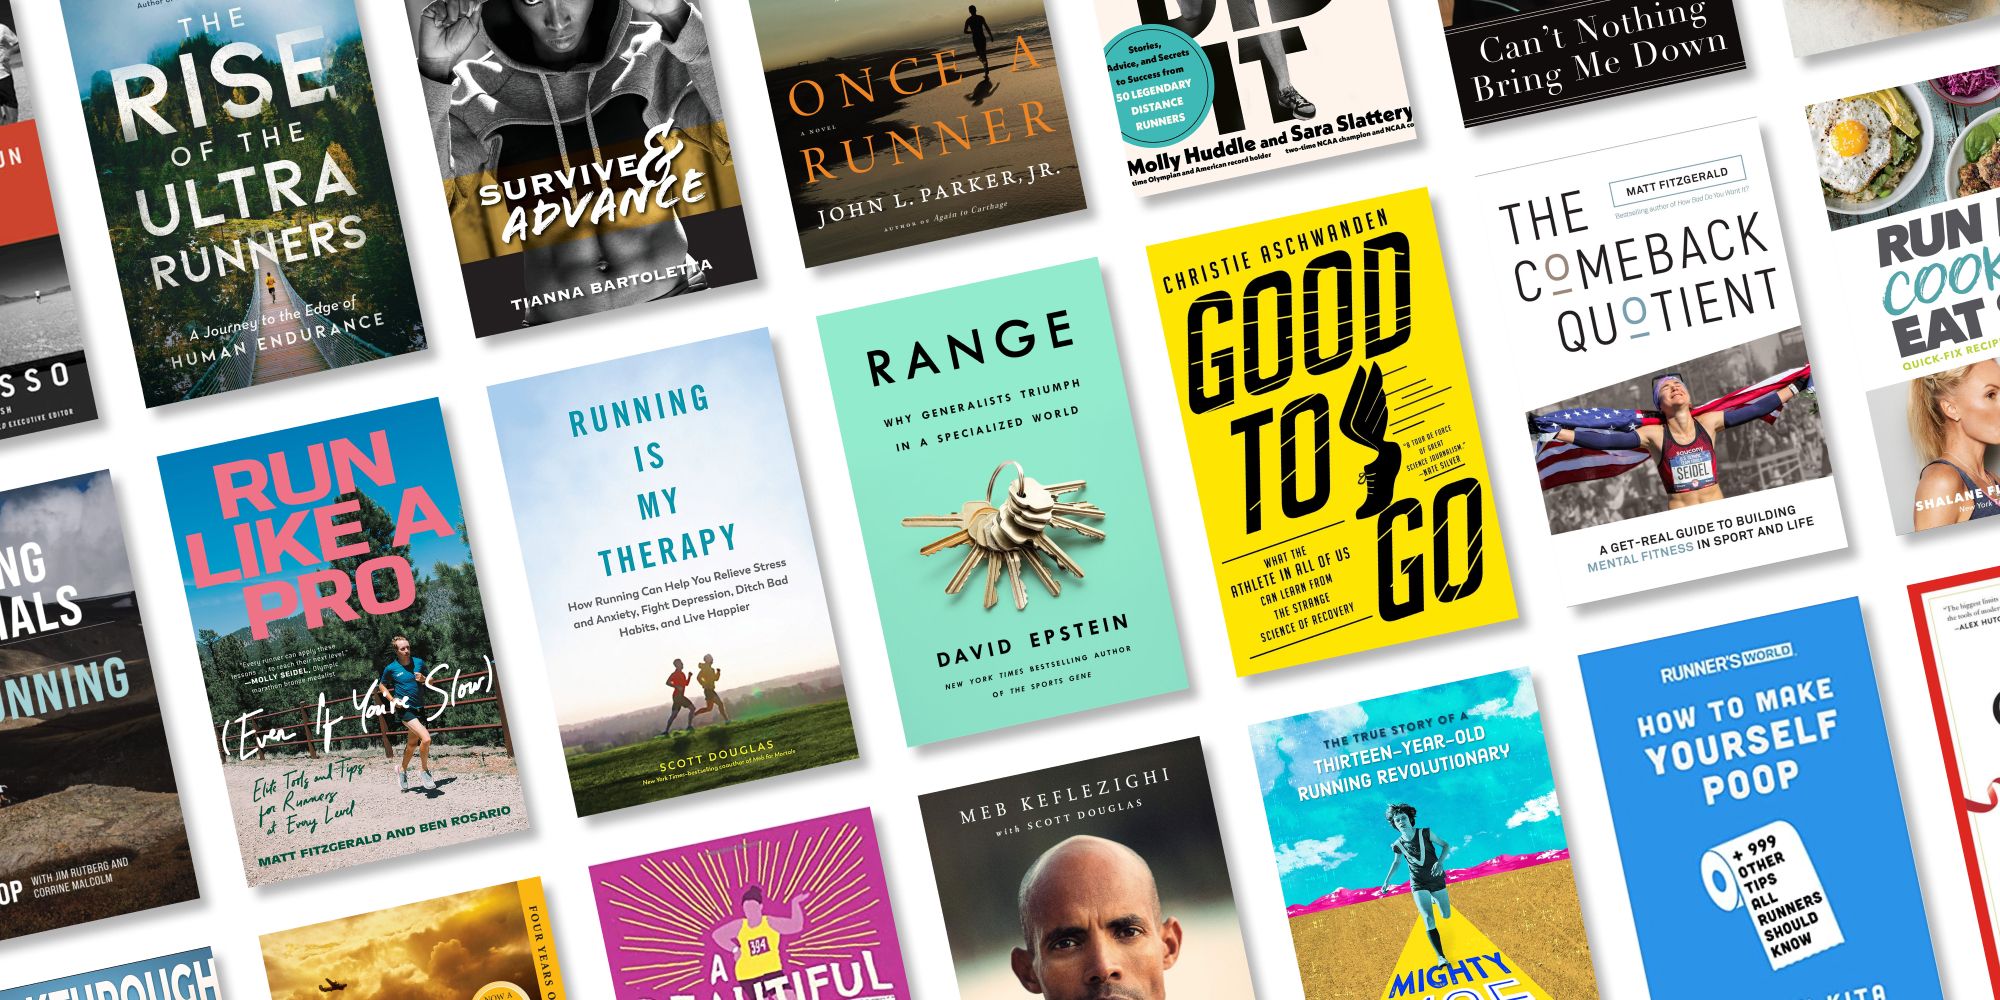 Good food, good habits, and great fiction—bestsellers for January